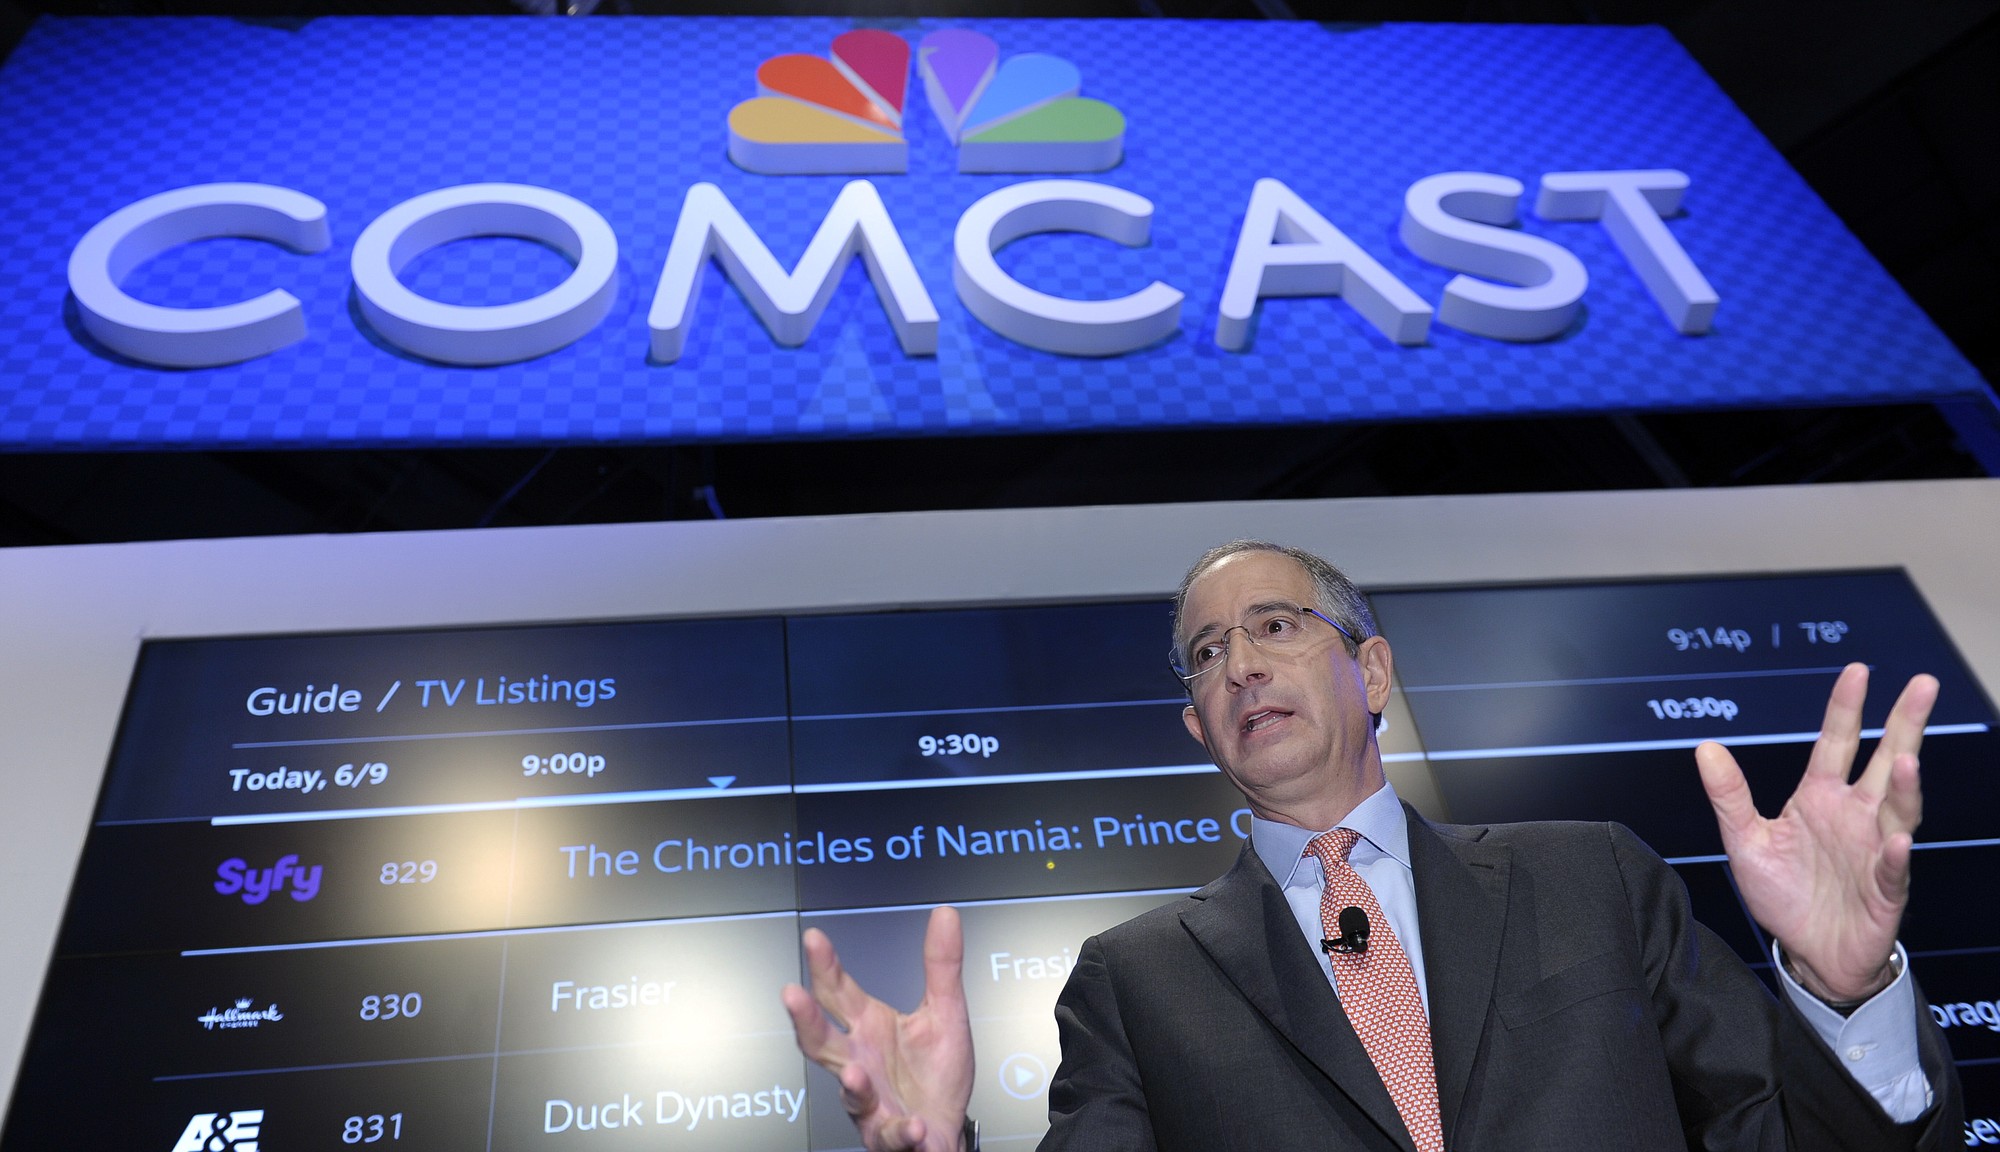 Comcast Corp. CEO Brian Roberts speaks June 11, 2013 during The Cable Show 2013 convention in Washington.